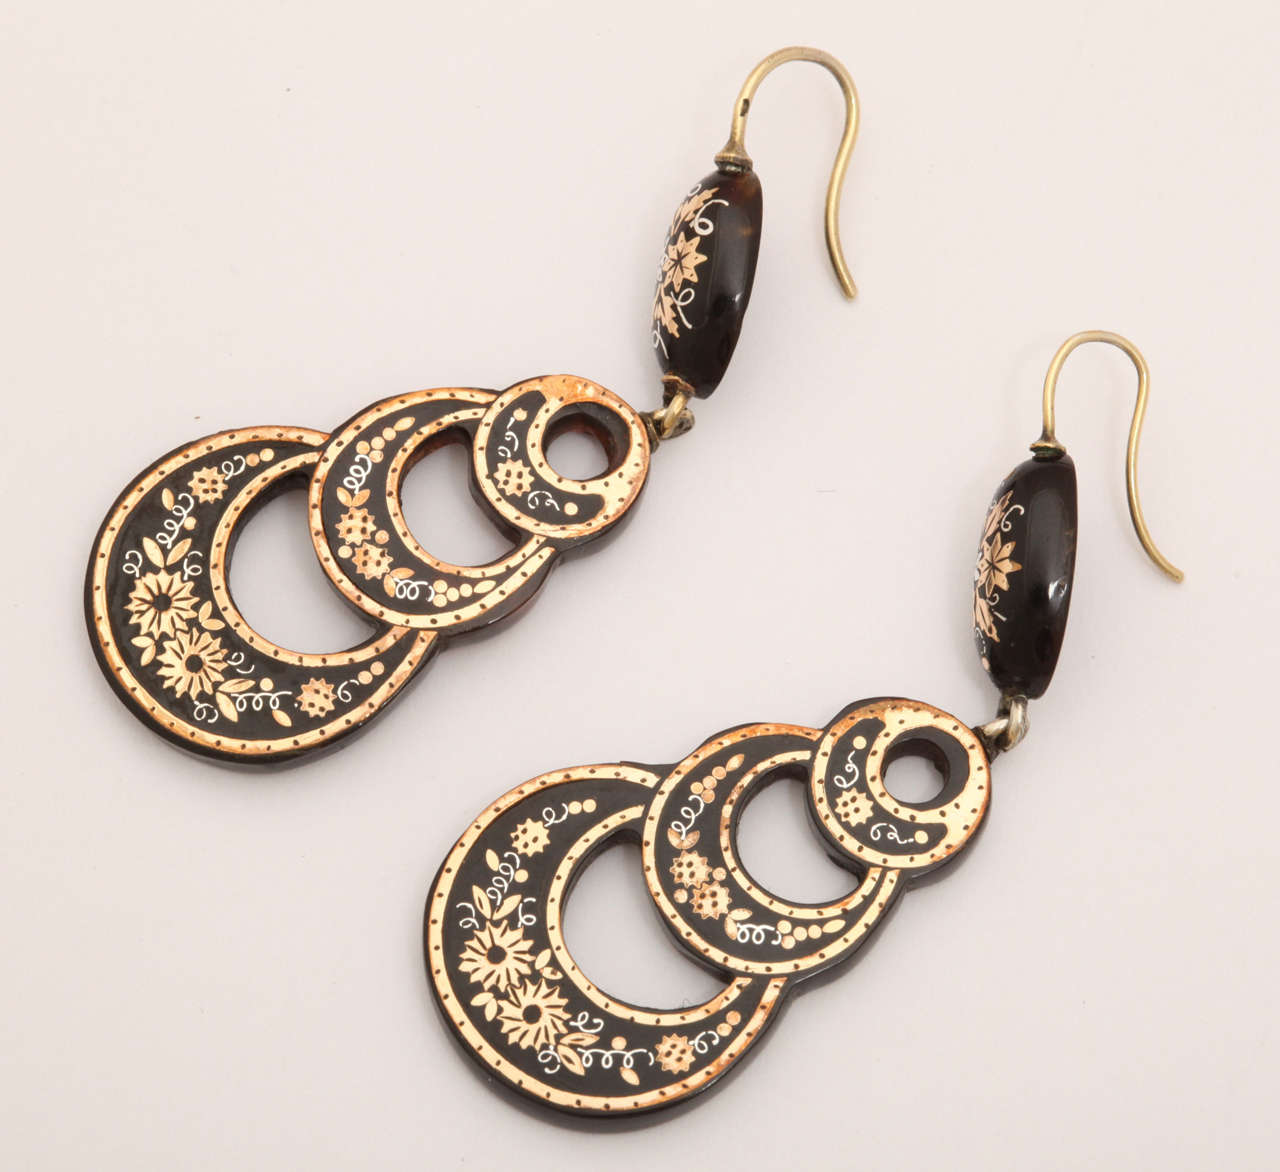 Floral wreaths of gold accented with silver fill the rings of these luscious pique earrings. An oval of the same floral display is attached to the wire. We found these earrings in original condition with ear wires intact. The rings are connected.